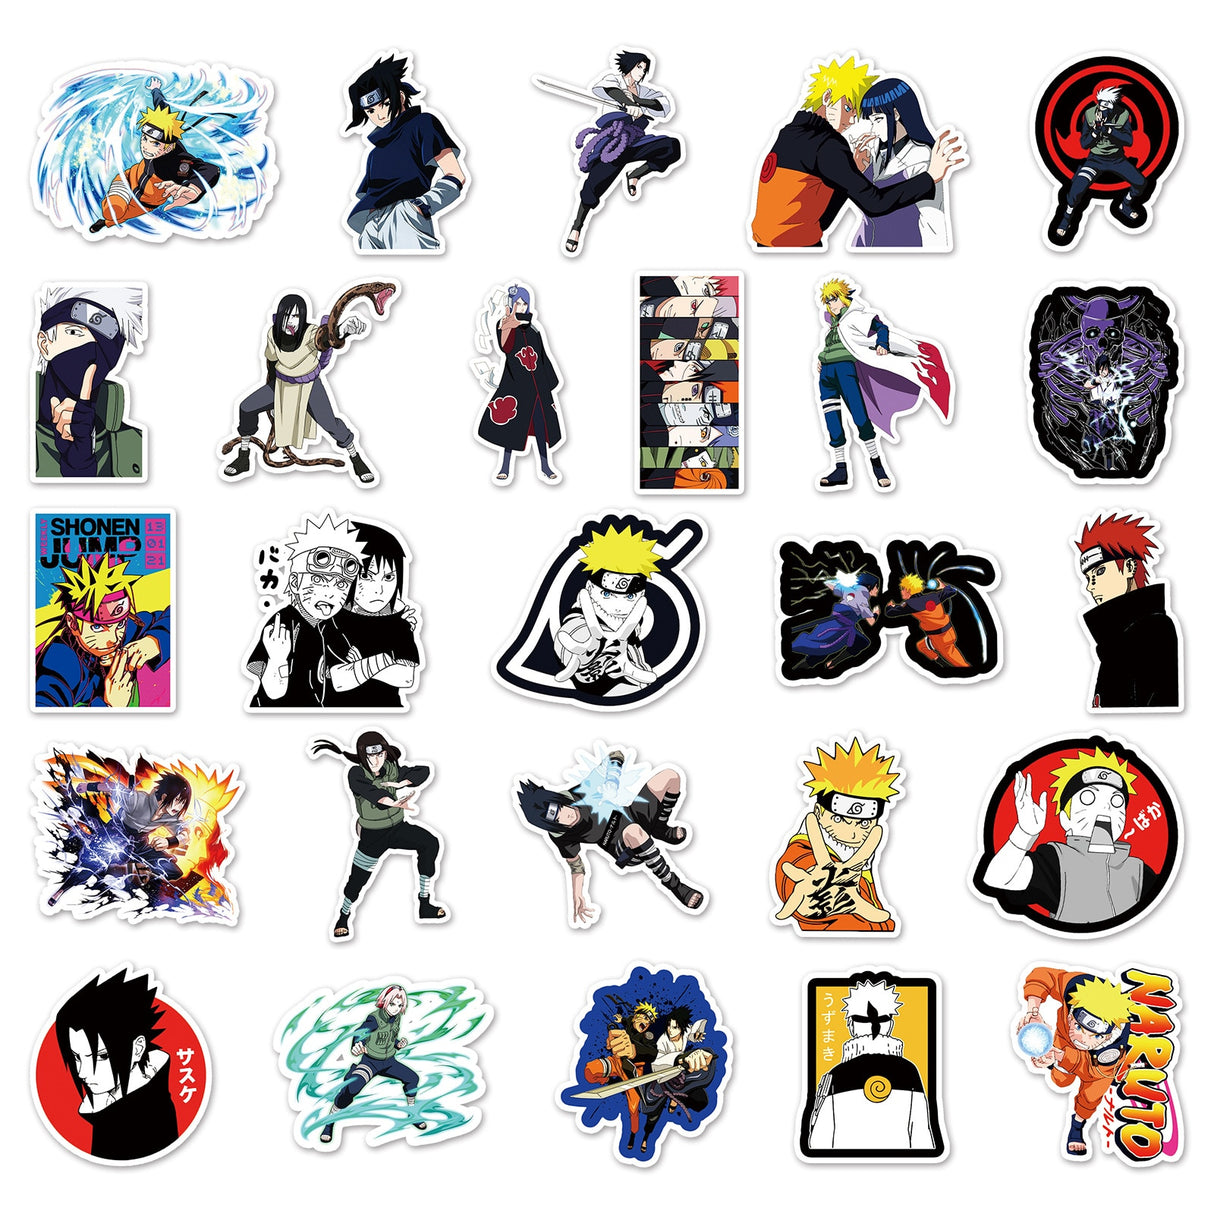 50 Naruto Anime Cartoon Ornaments Notebook Suitcase Car Scooter Refrigerator Water Cup Guitar Waterproof Sticker Children's Gift